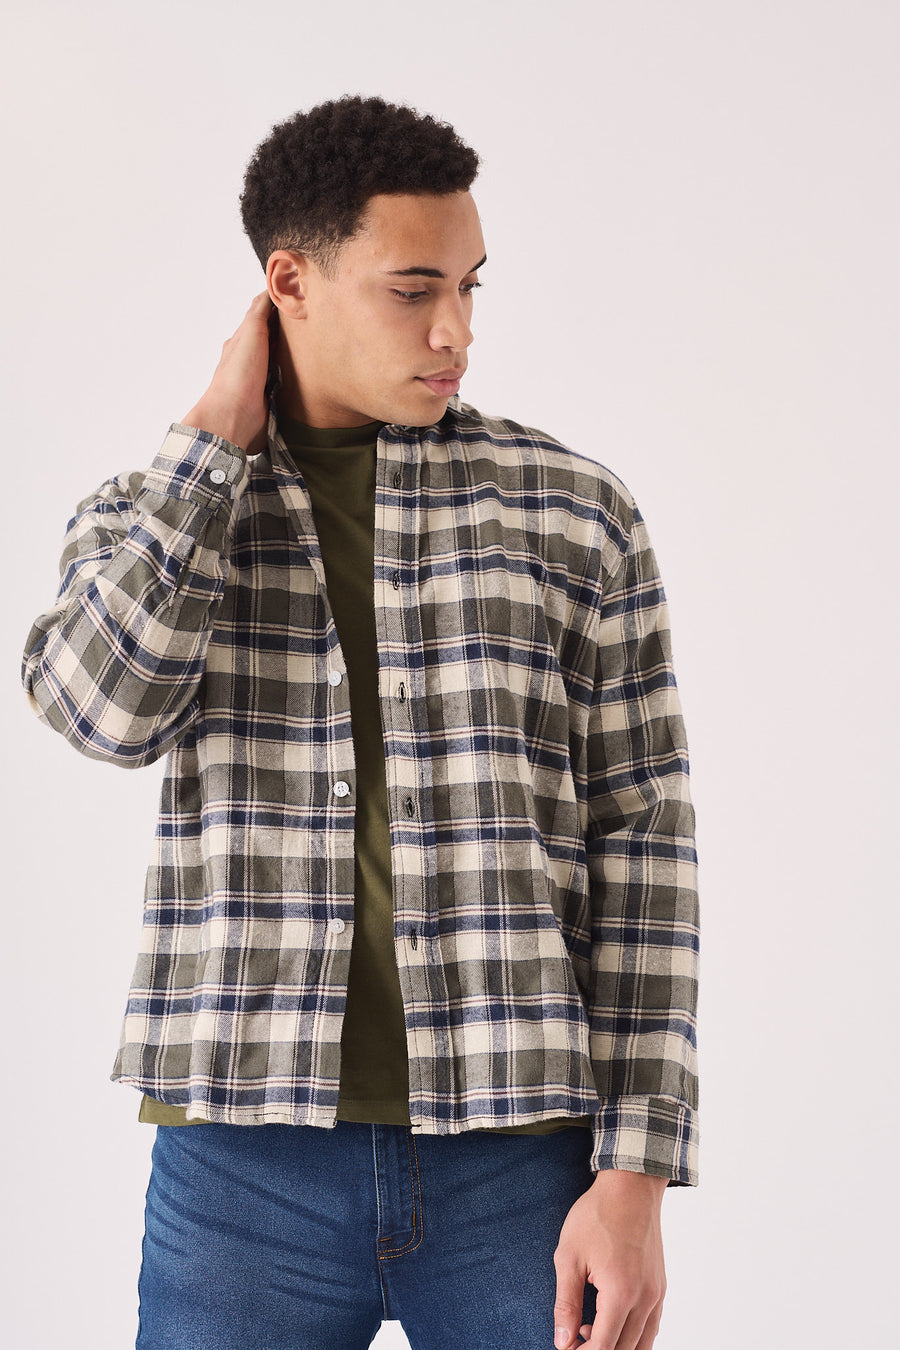 PLAID FLANNEL CHECK SHIRT - OLIVE GREEN, NAVY AND WHITE